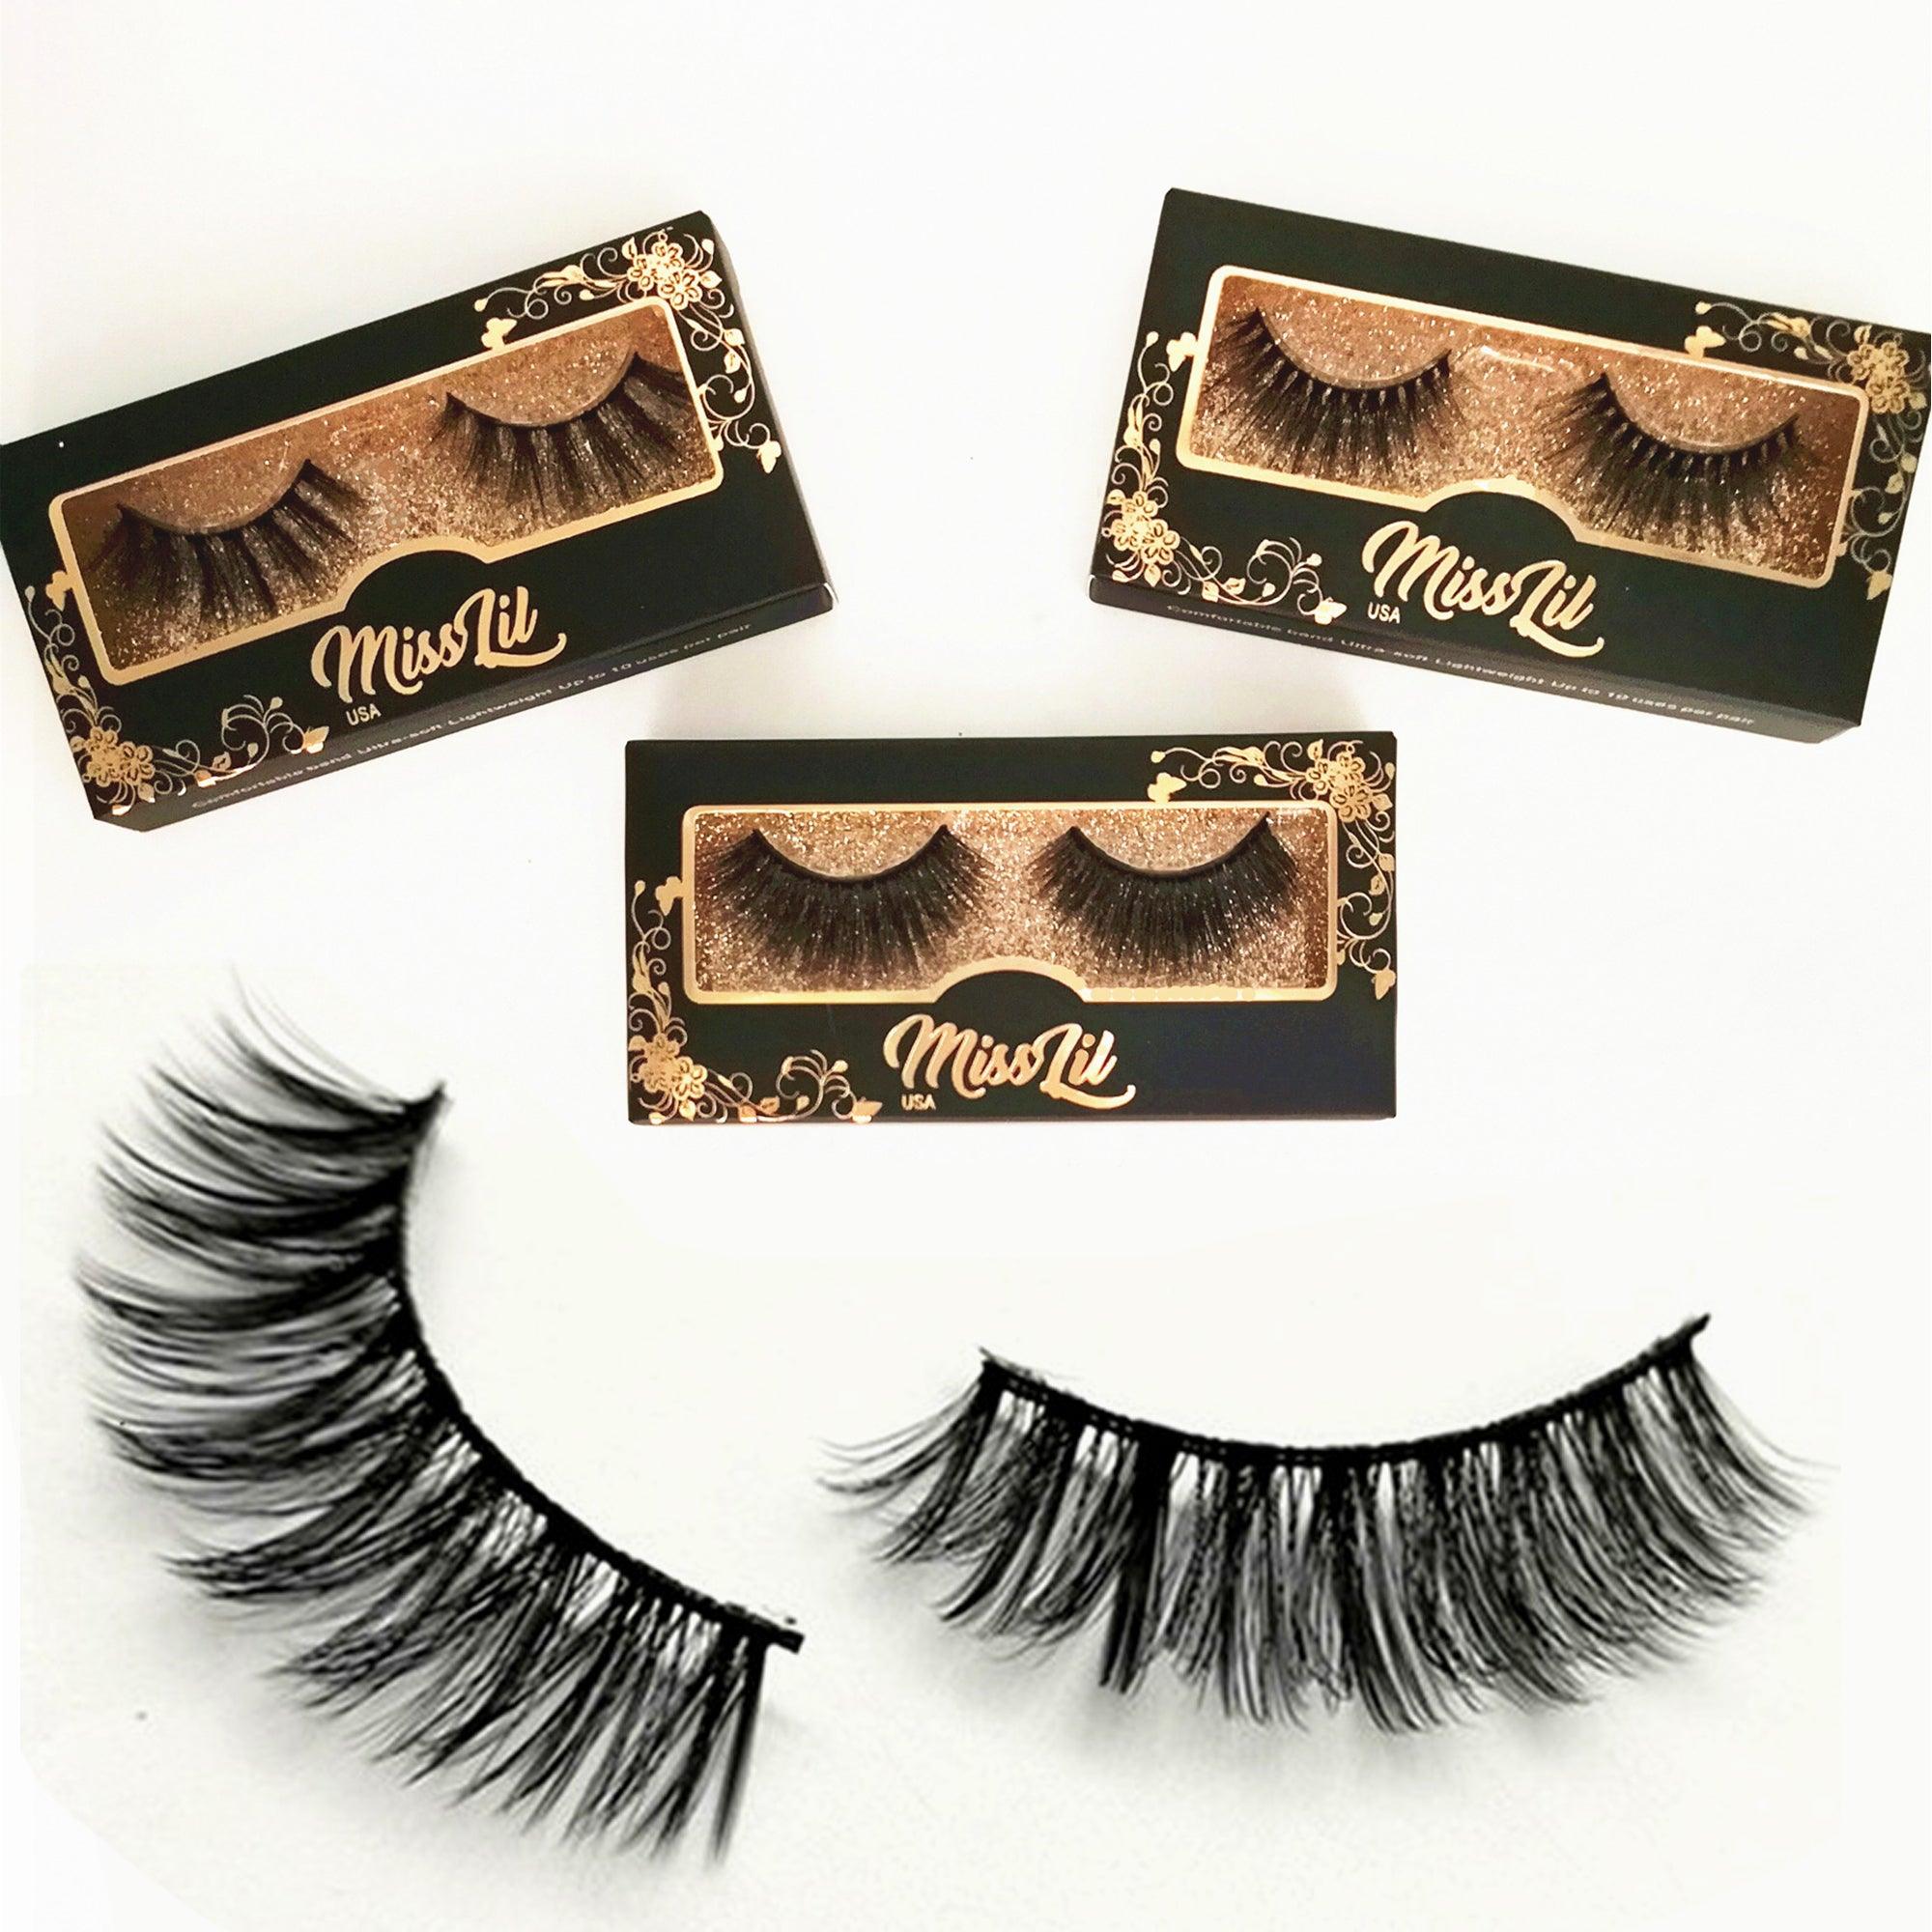 1-Pair Miss Lil USA Lashes #31 (Pack of 12) - Miss Lil USA Wholesale